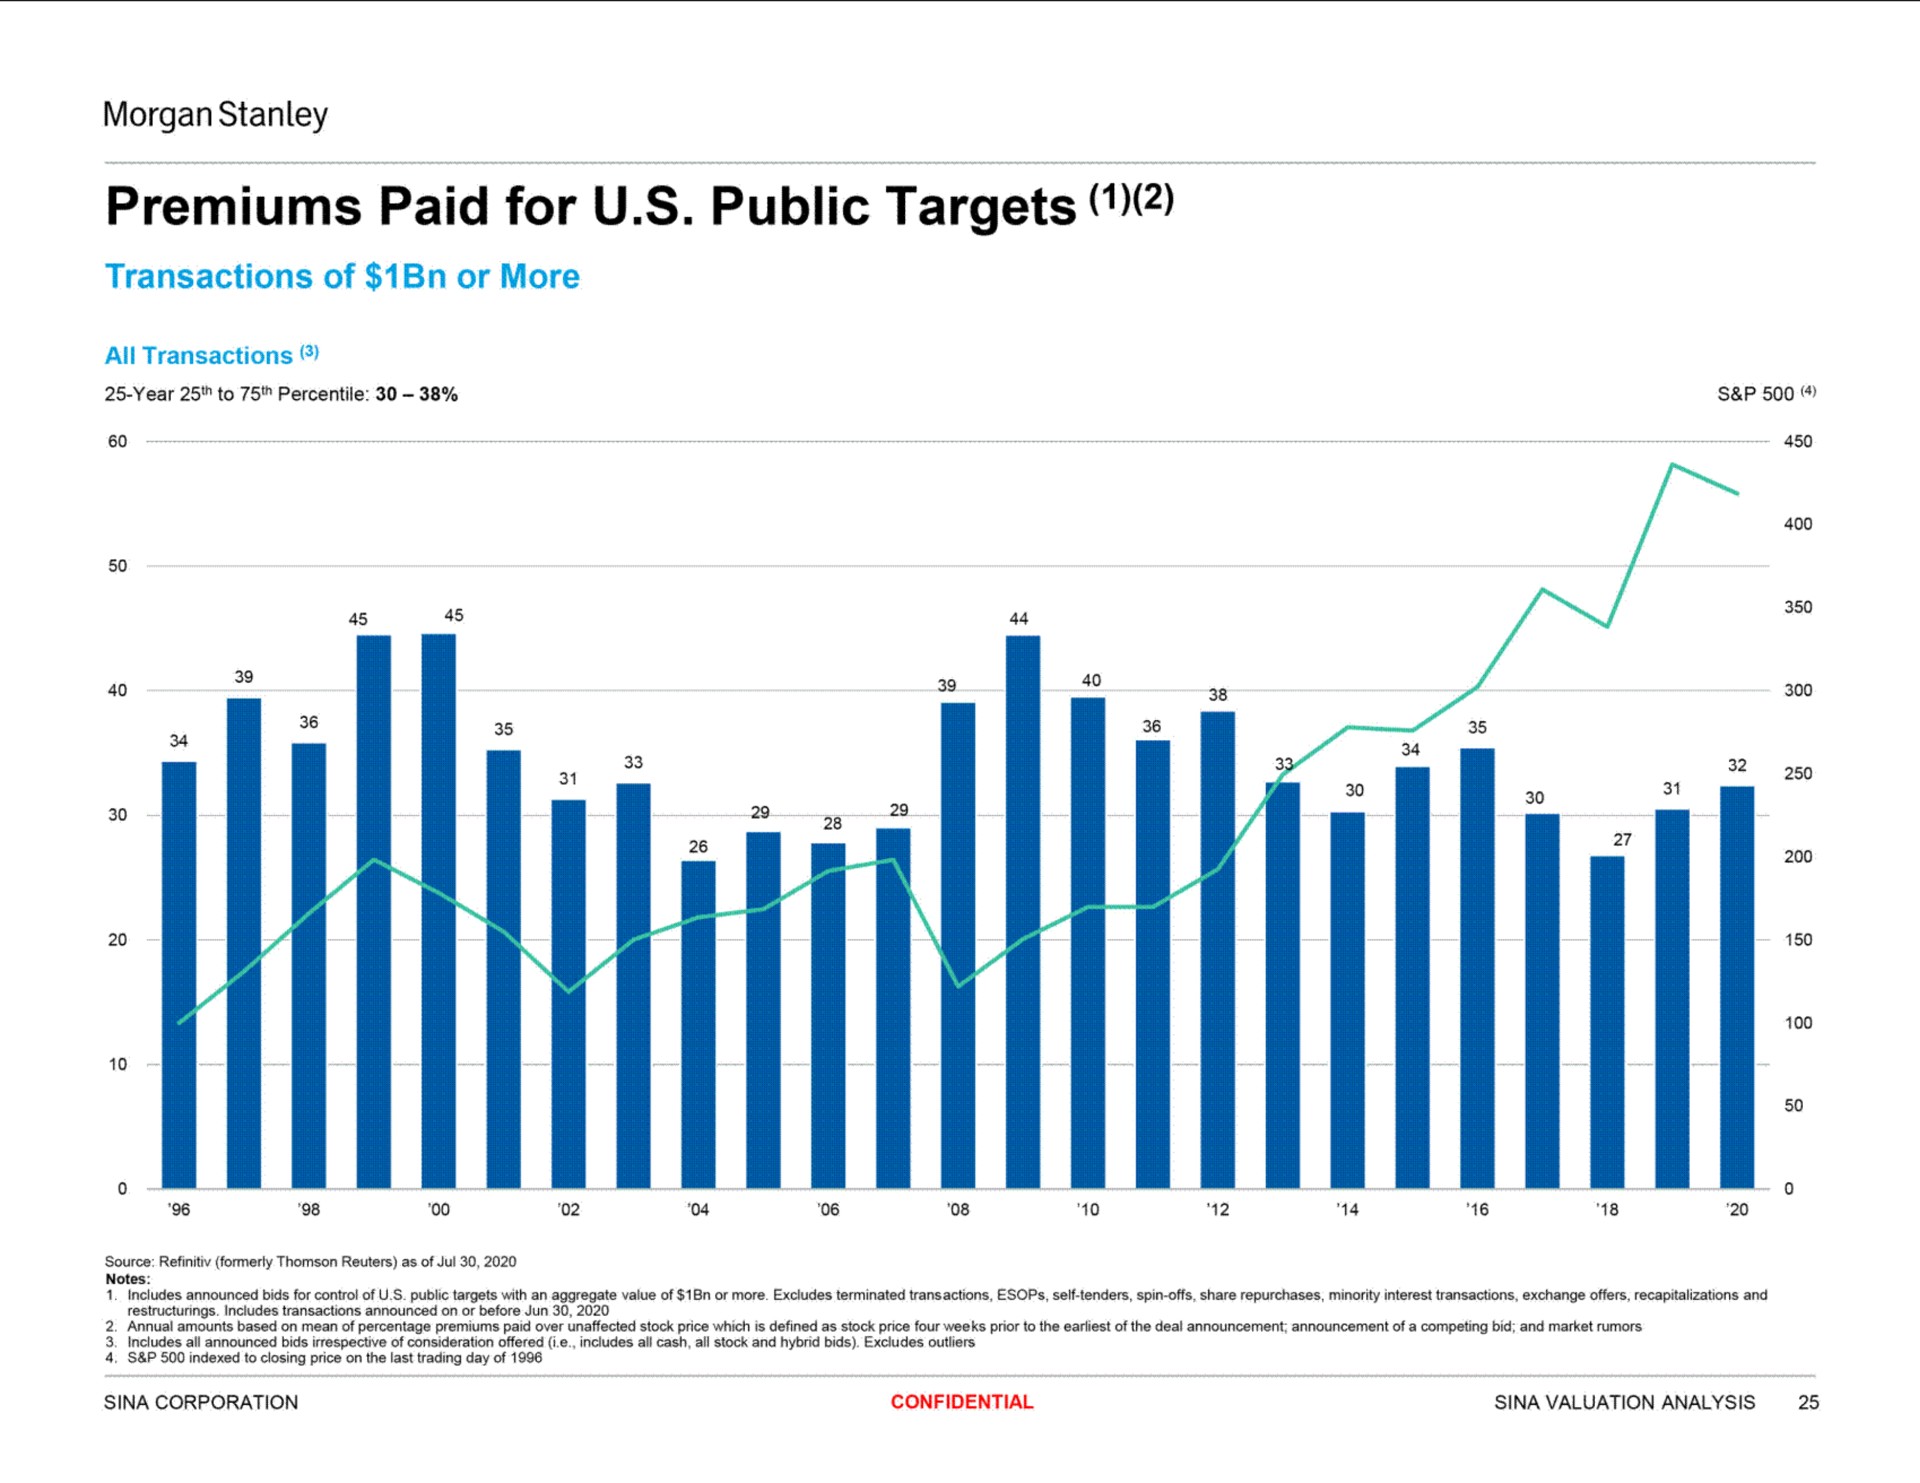 premiums paid for public targets | Morgan Stanley